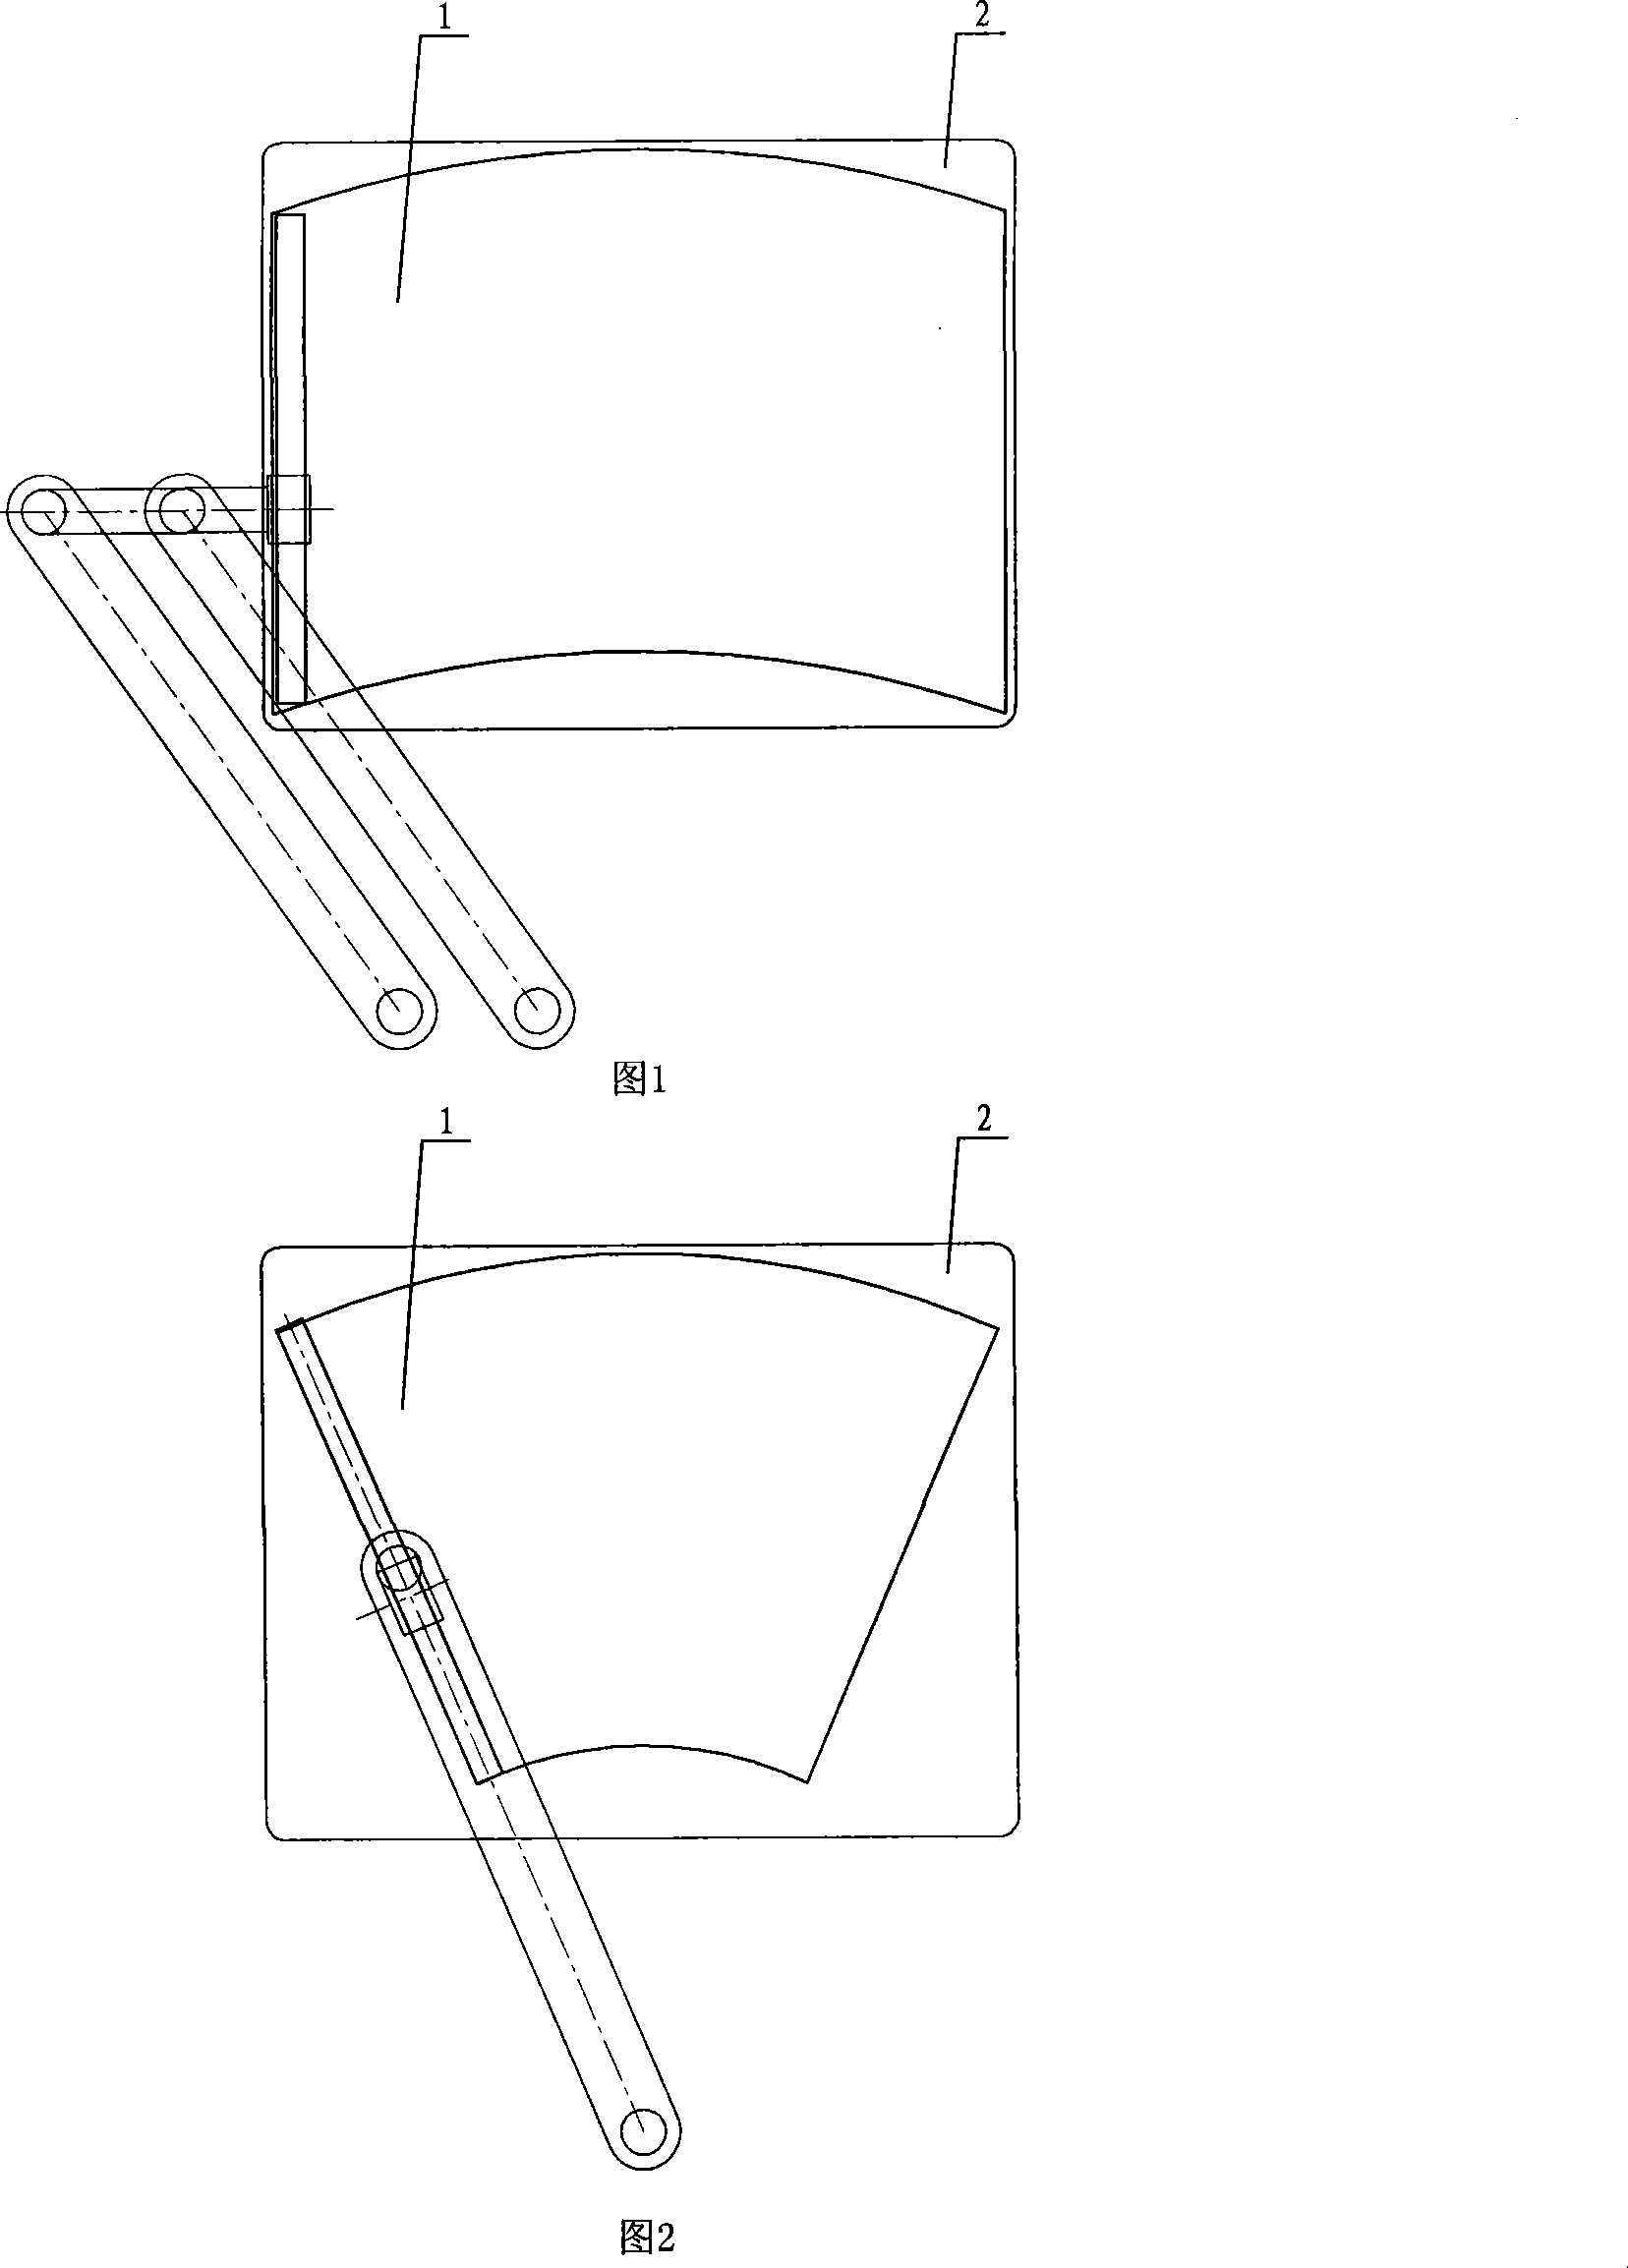 Single-arm windshield wiper with circular ring shaped section